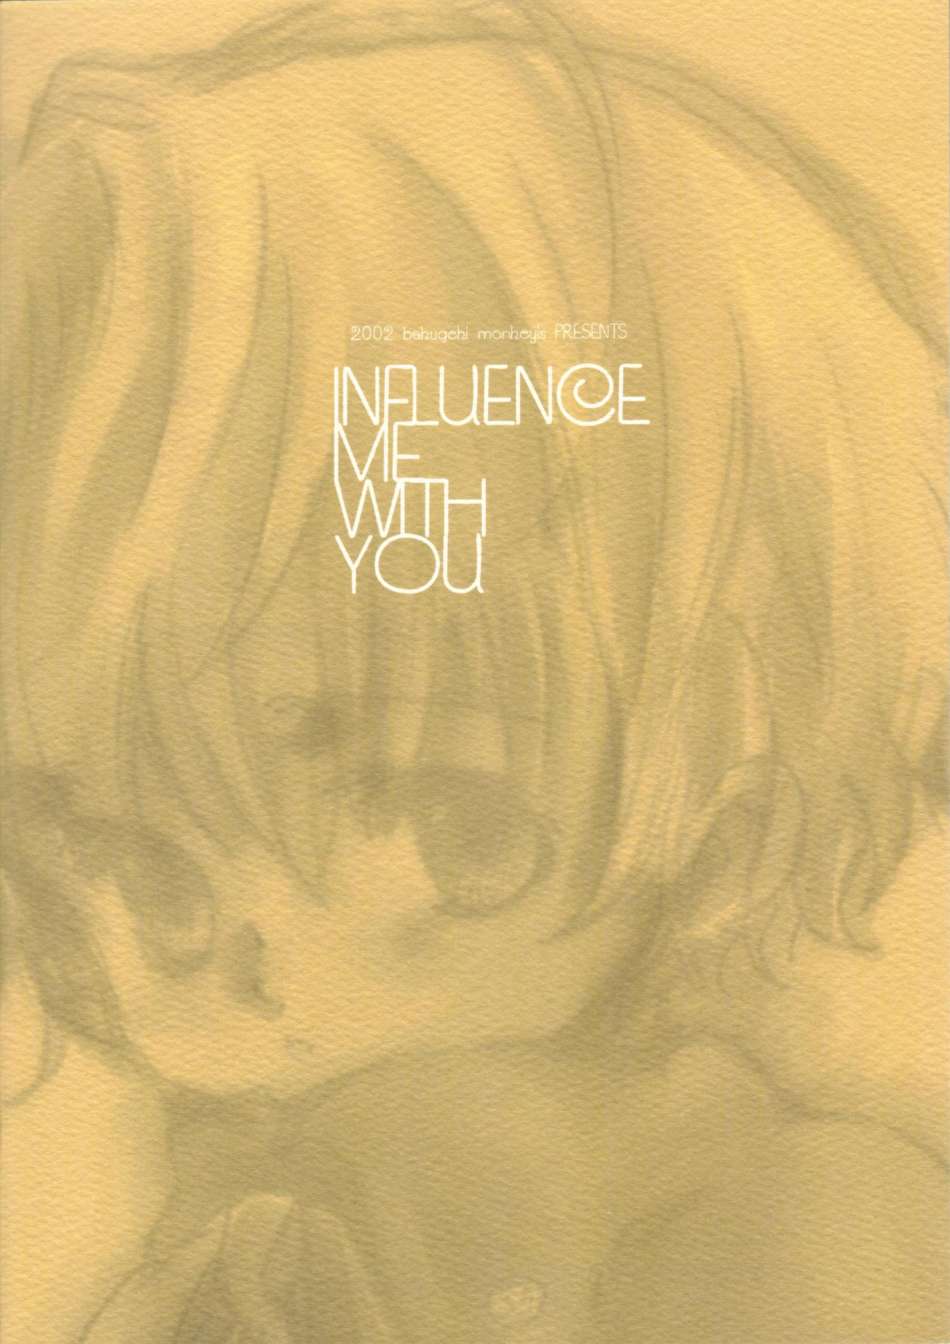 (C63) [爆撃モンキース (犬神尚雪)] INFLUENCE ME WITH YOU